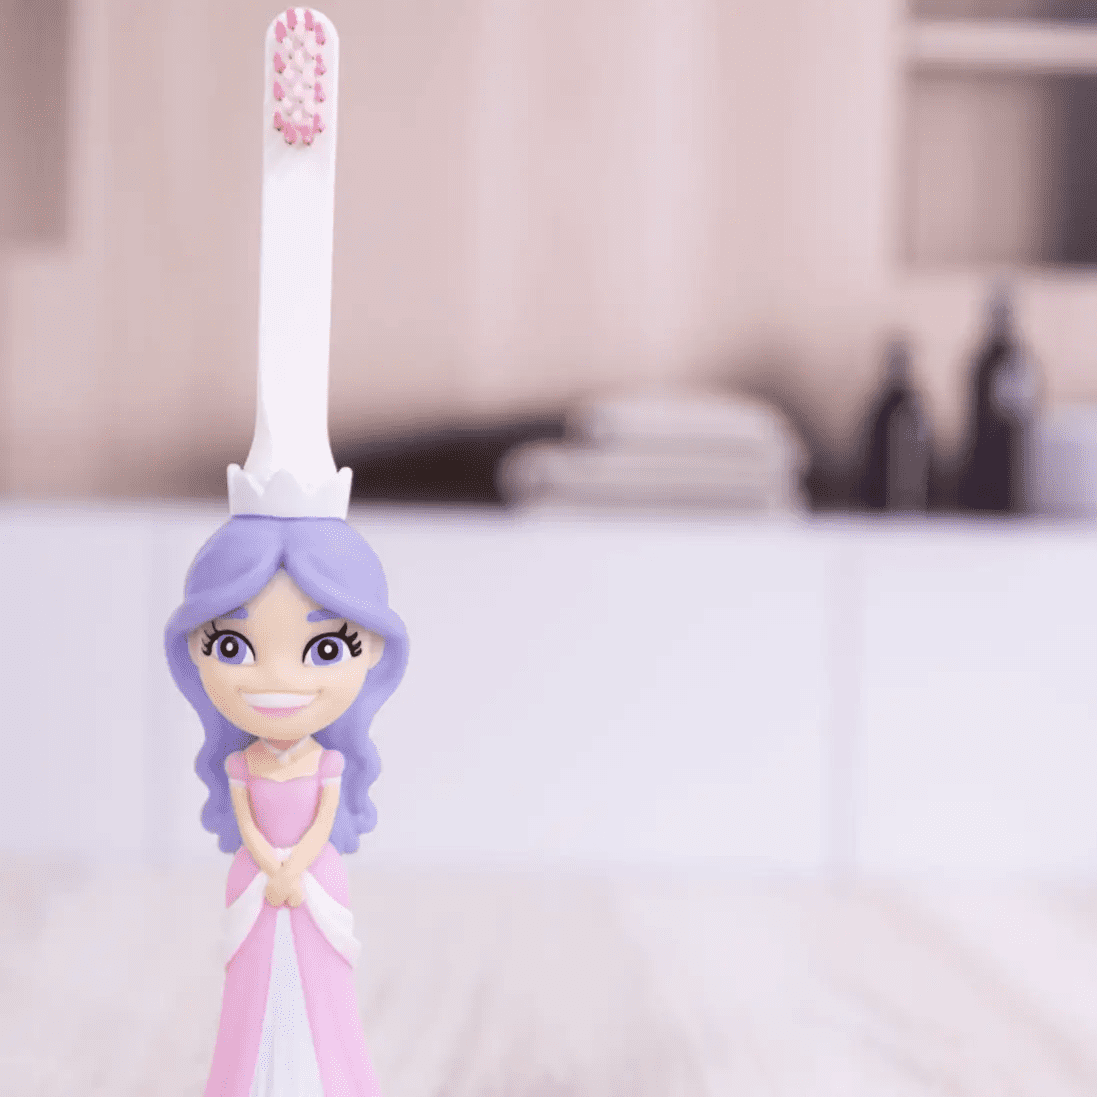 Toy toothbrush featuring a princess, part of the Princess Pearly Whites product